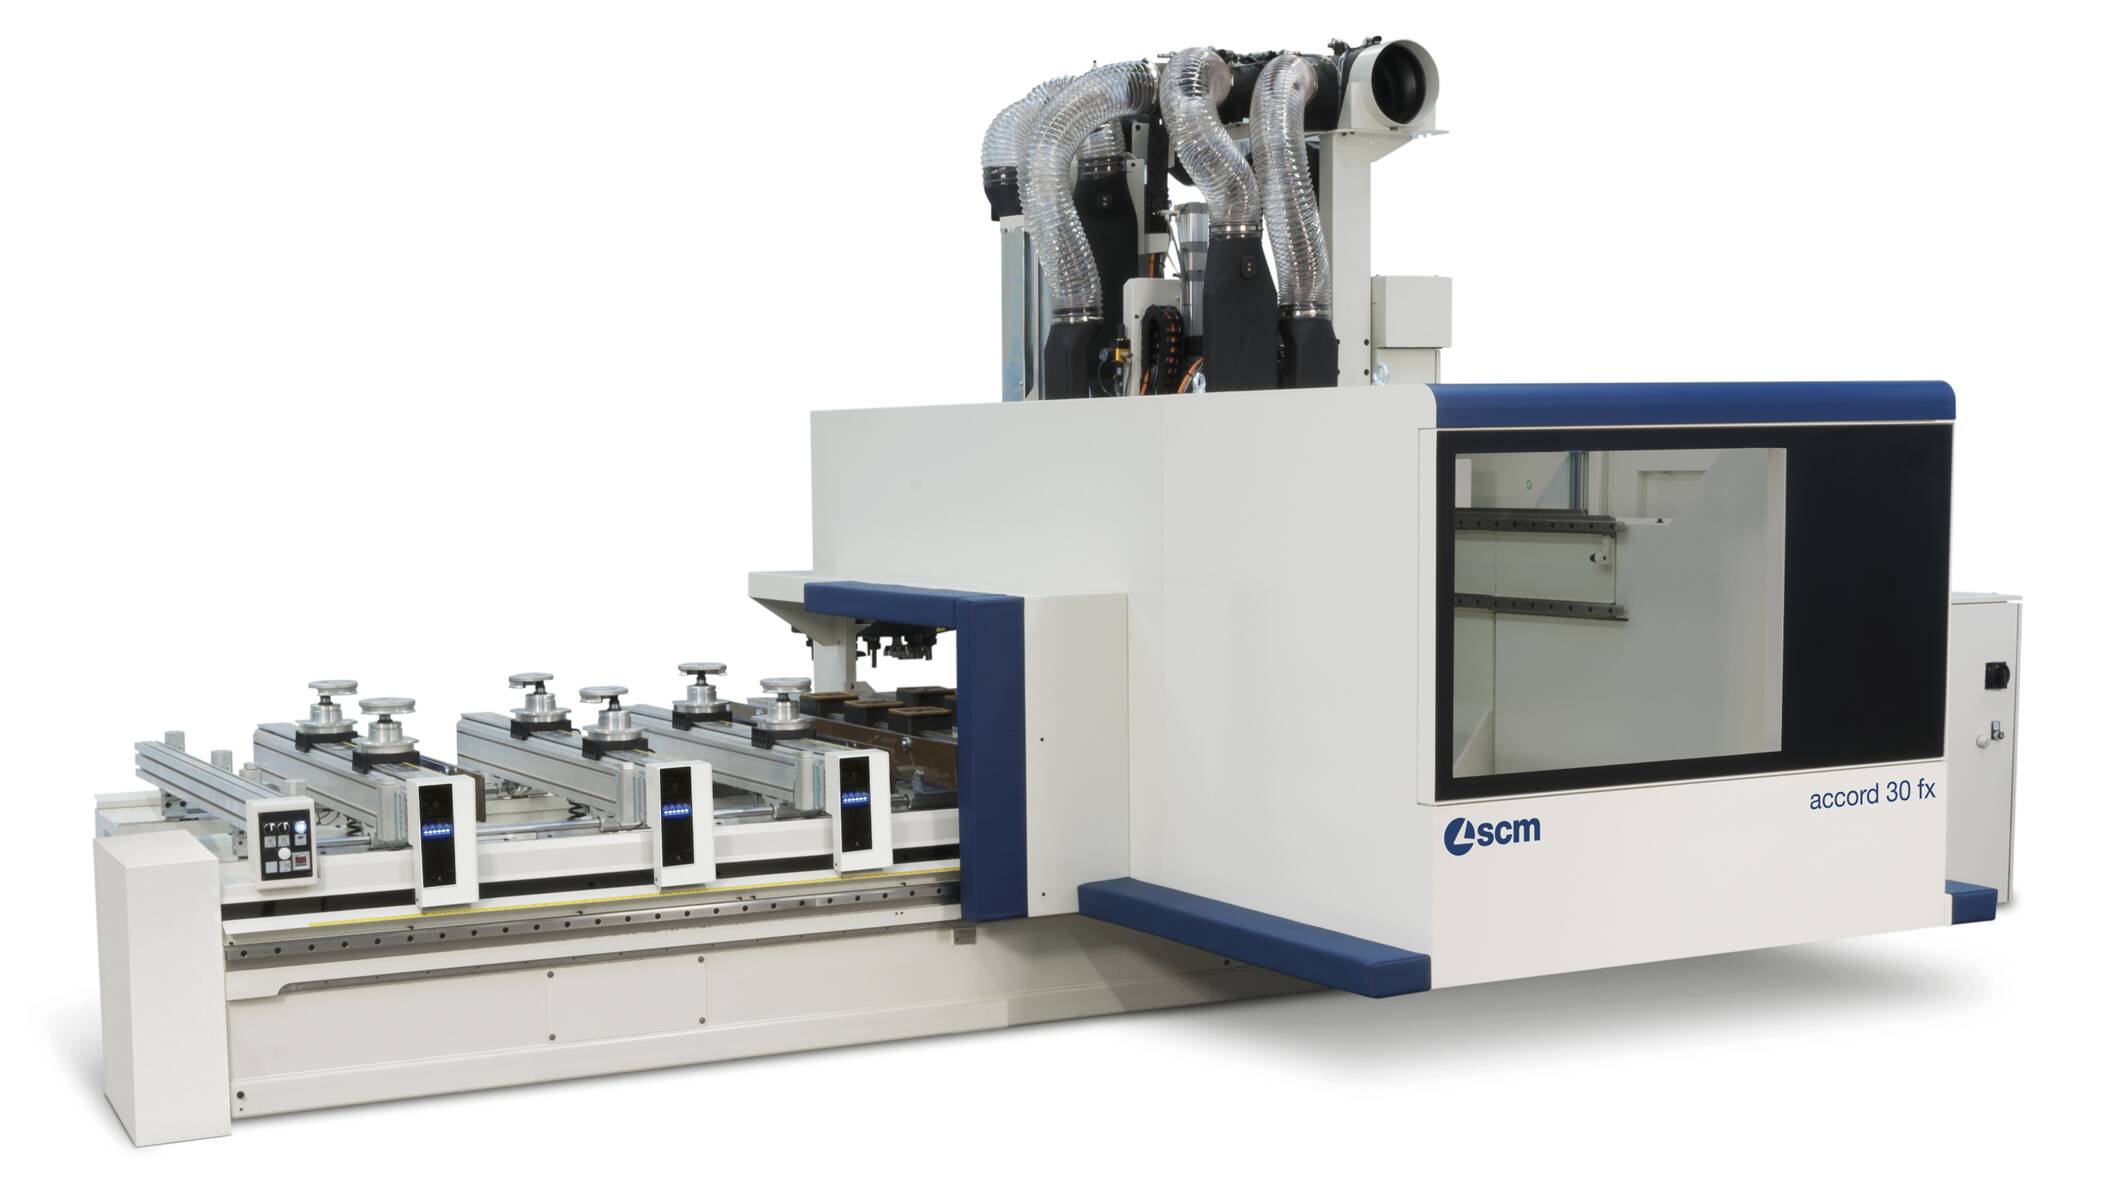 CNC Machining Centres - CNC Machining Centres for routing and drilling - accord 30 fx